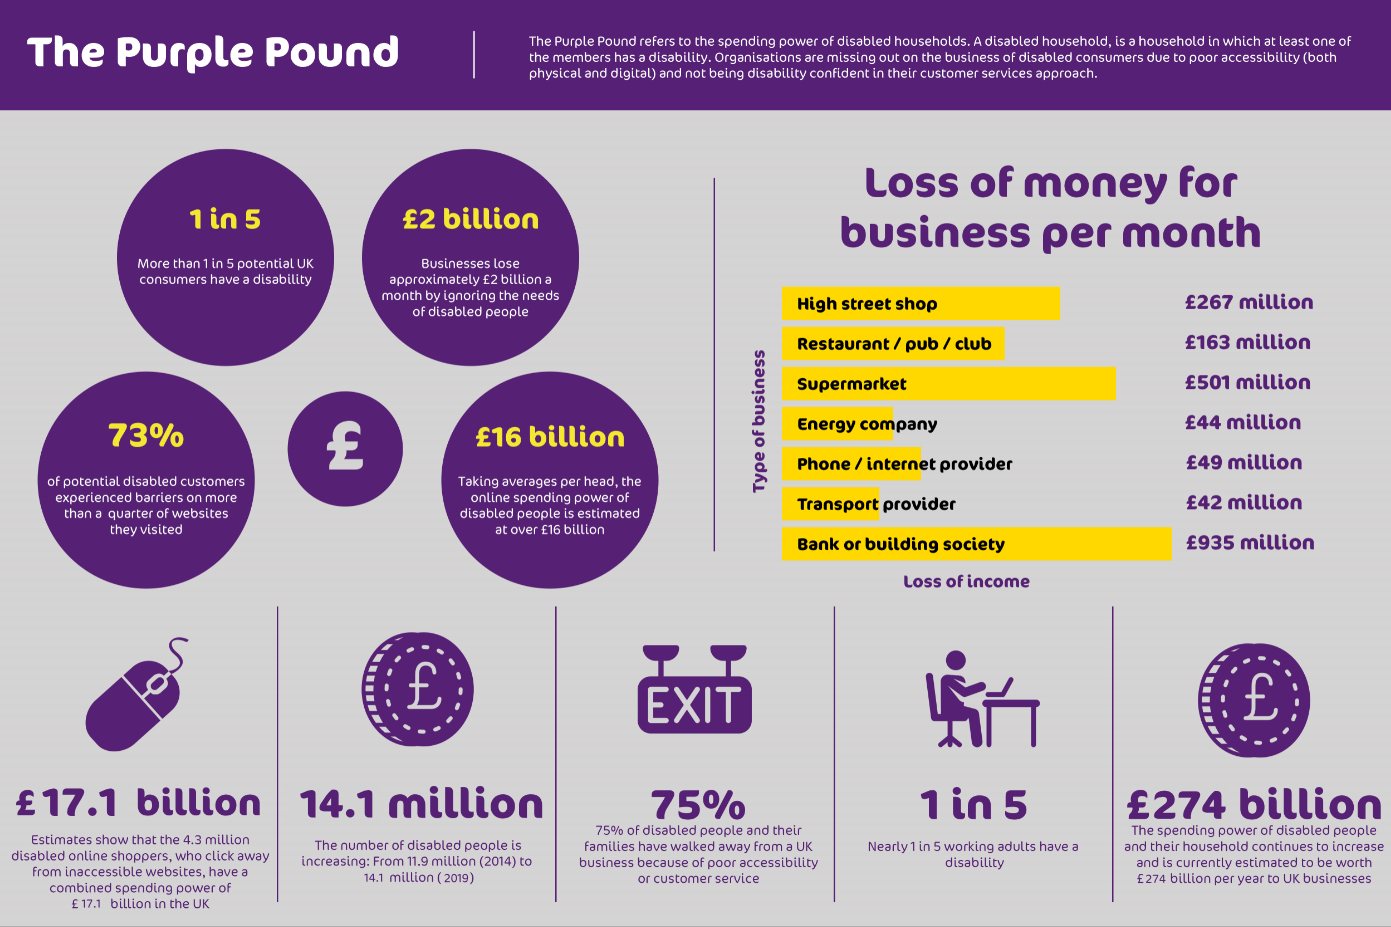 The Purple pound infographic which details the estimated loss of money for business per month due to inaccessibility